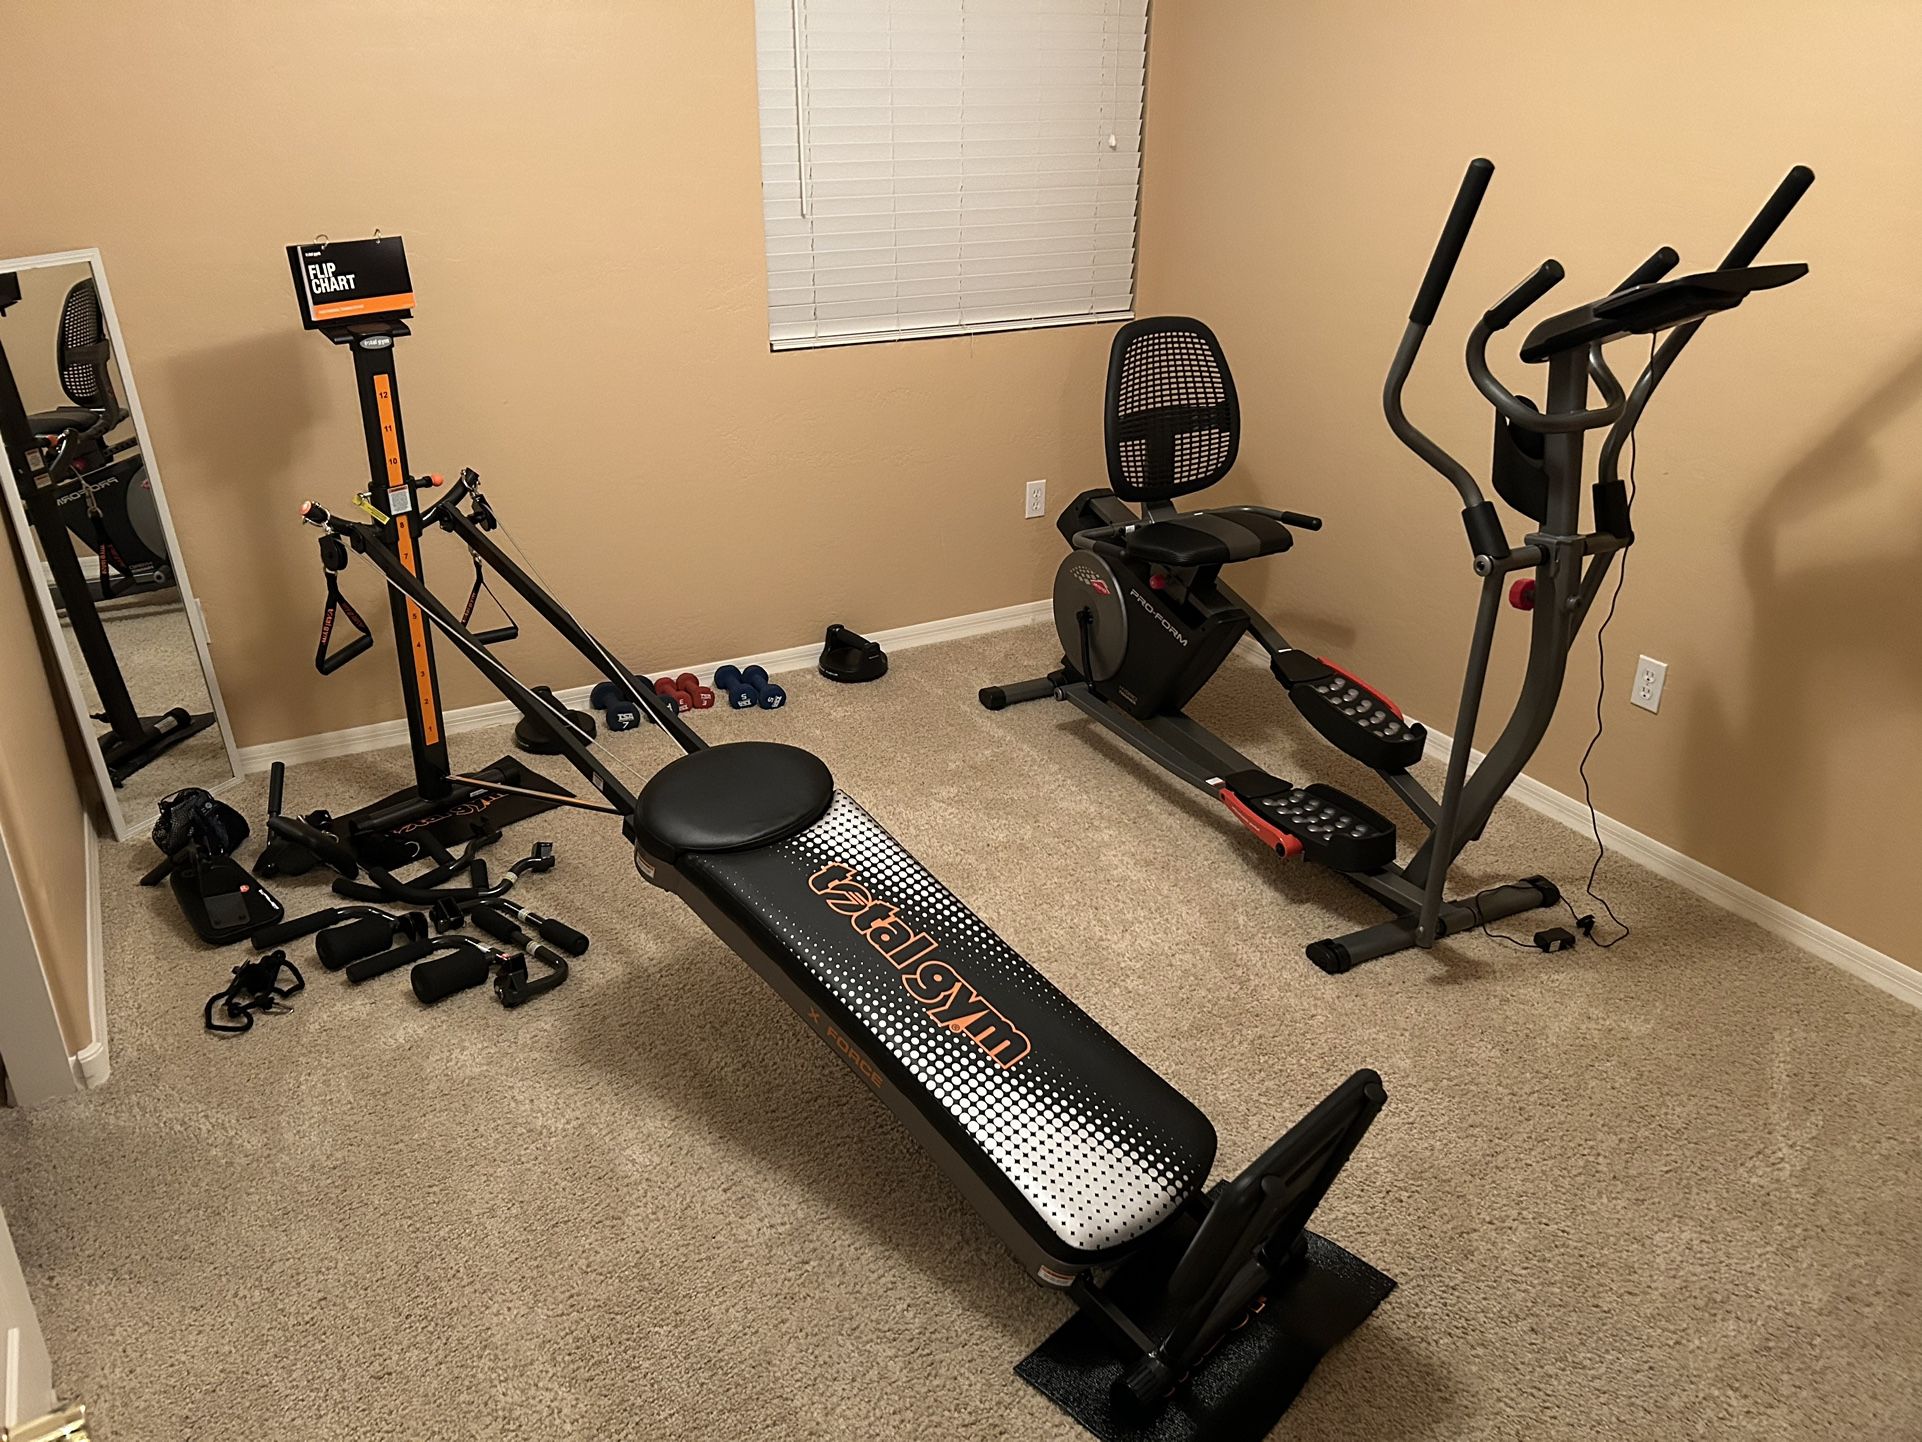 Home Gym Equipment - Almost New - Hybrid Elliptical And Total Gym 